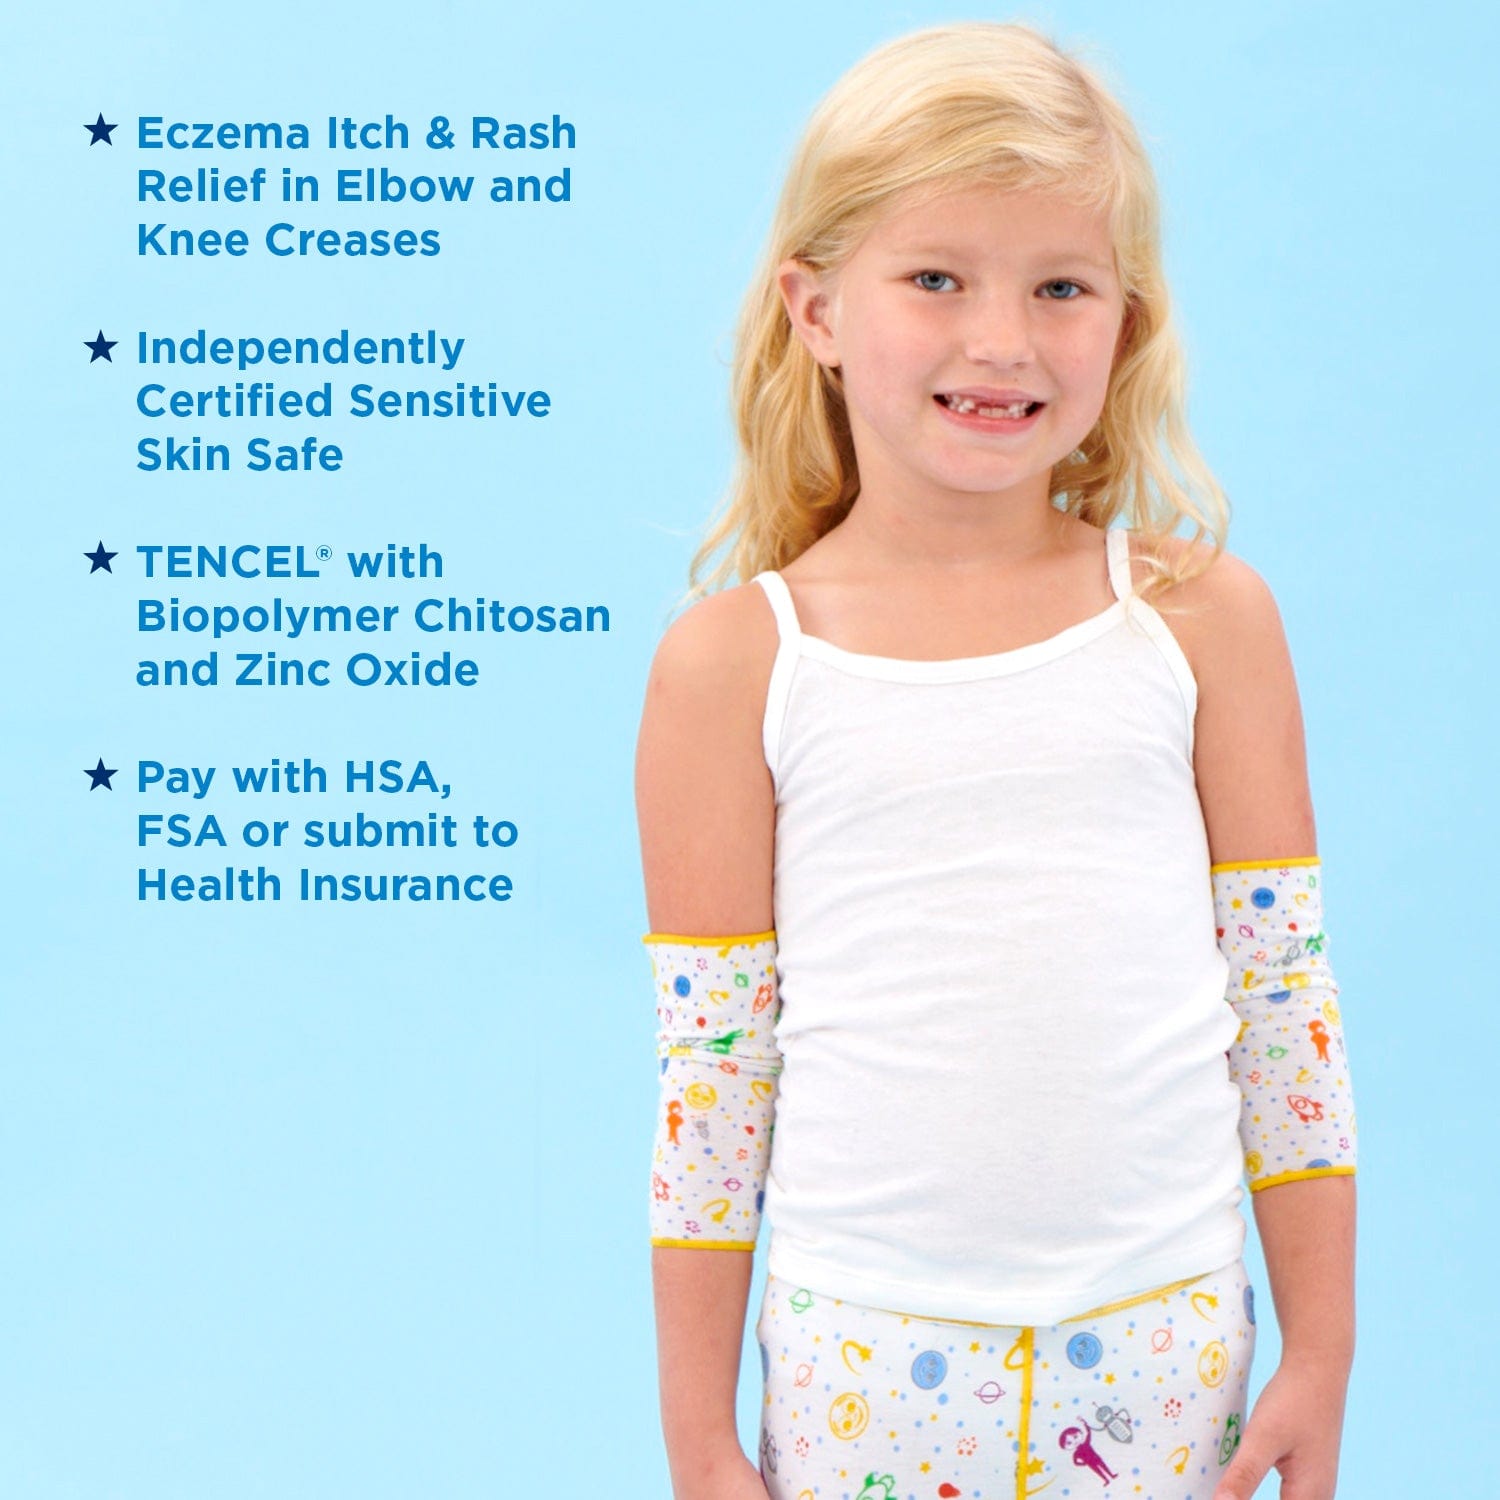 “Eczema Baby and children Sleeves and Clothing Stops Scratching at Night”